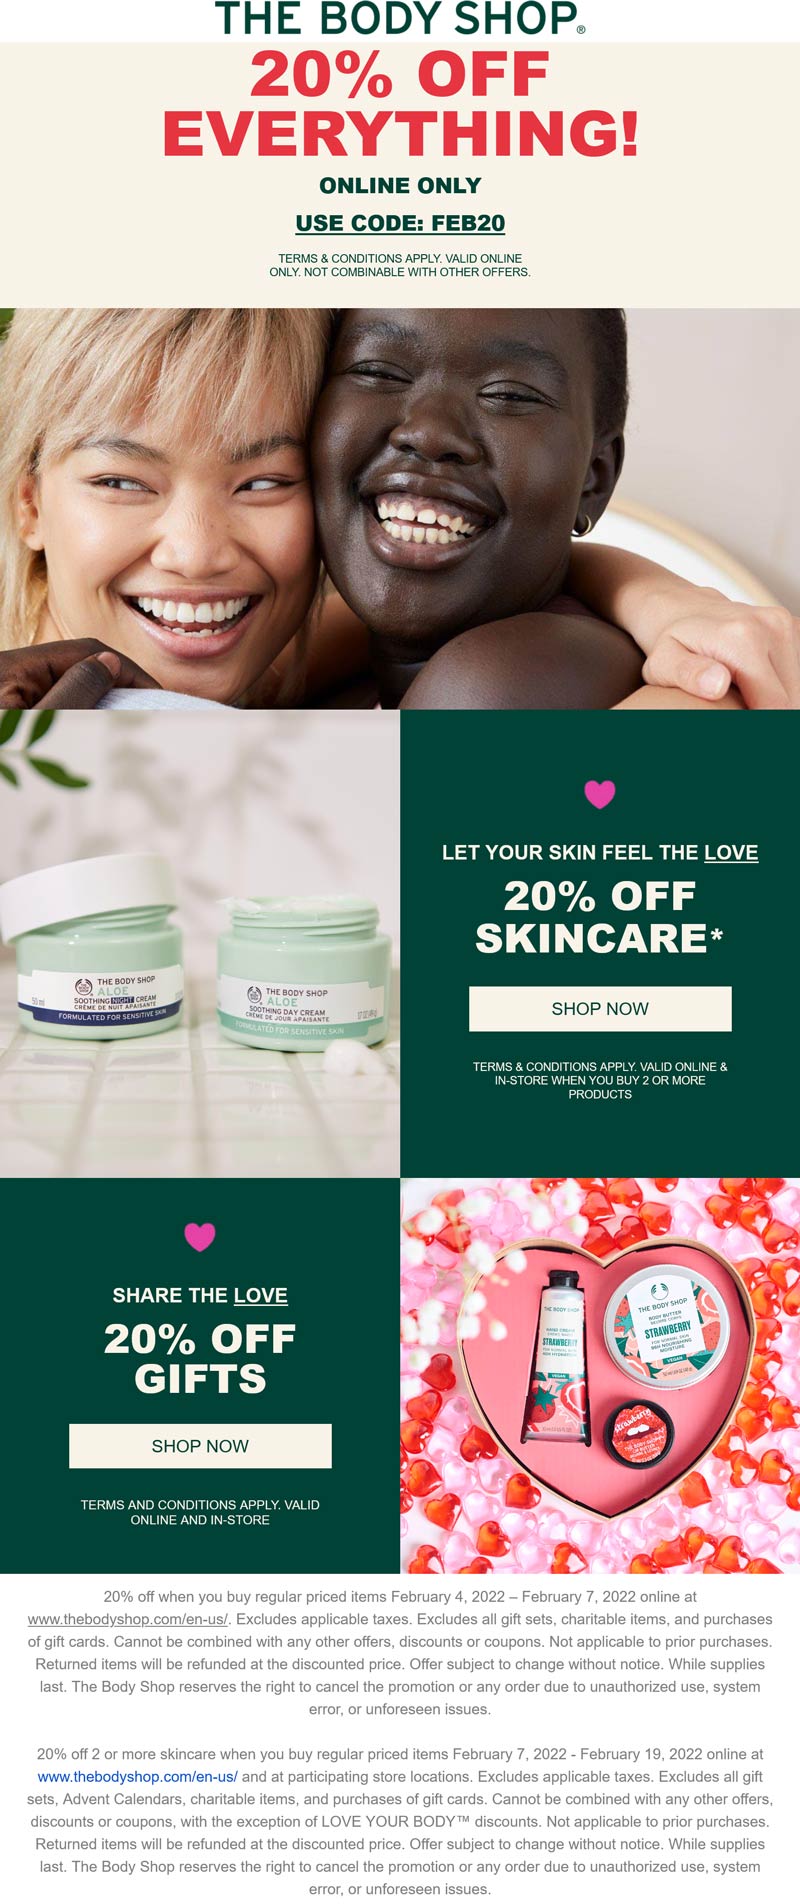 The Body Shop stores Coupon  20% off everything online today at The Body Shop via promo code FEB20 #thebodyshop 